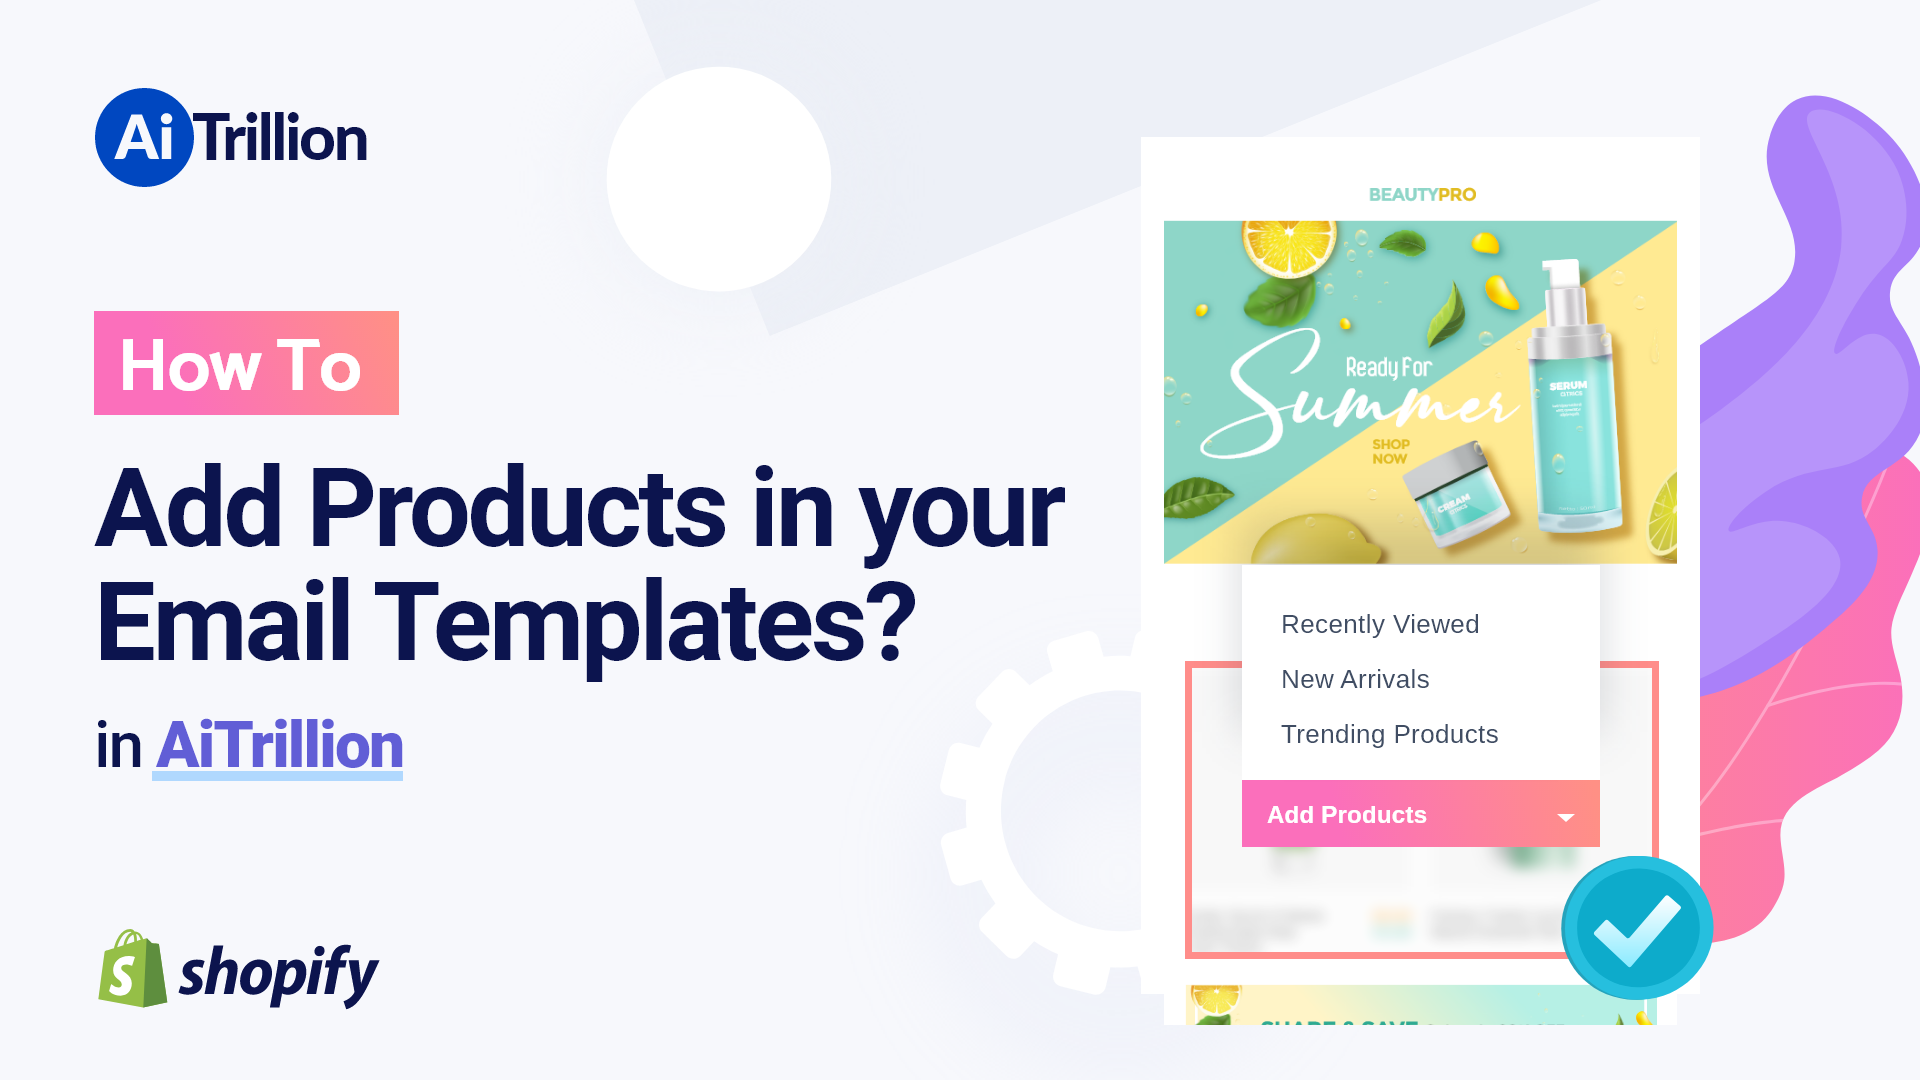 How To Add Products in your Email Templates